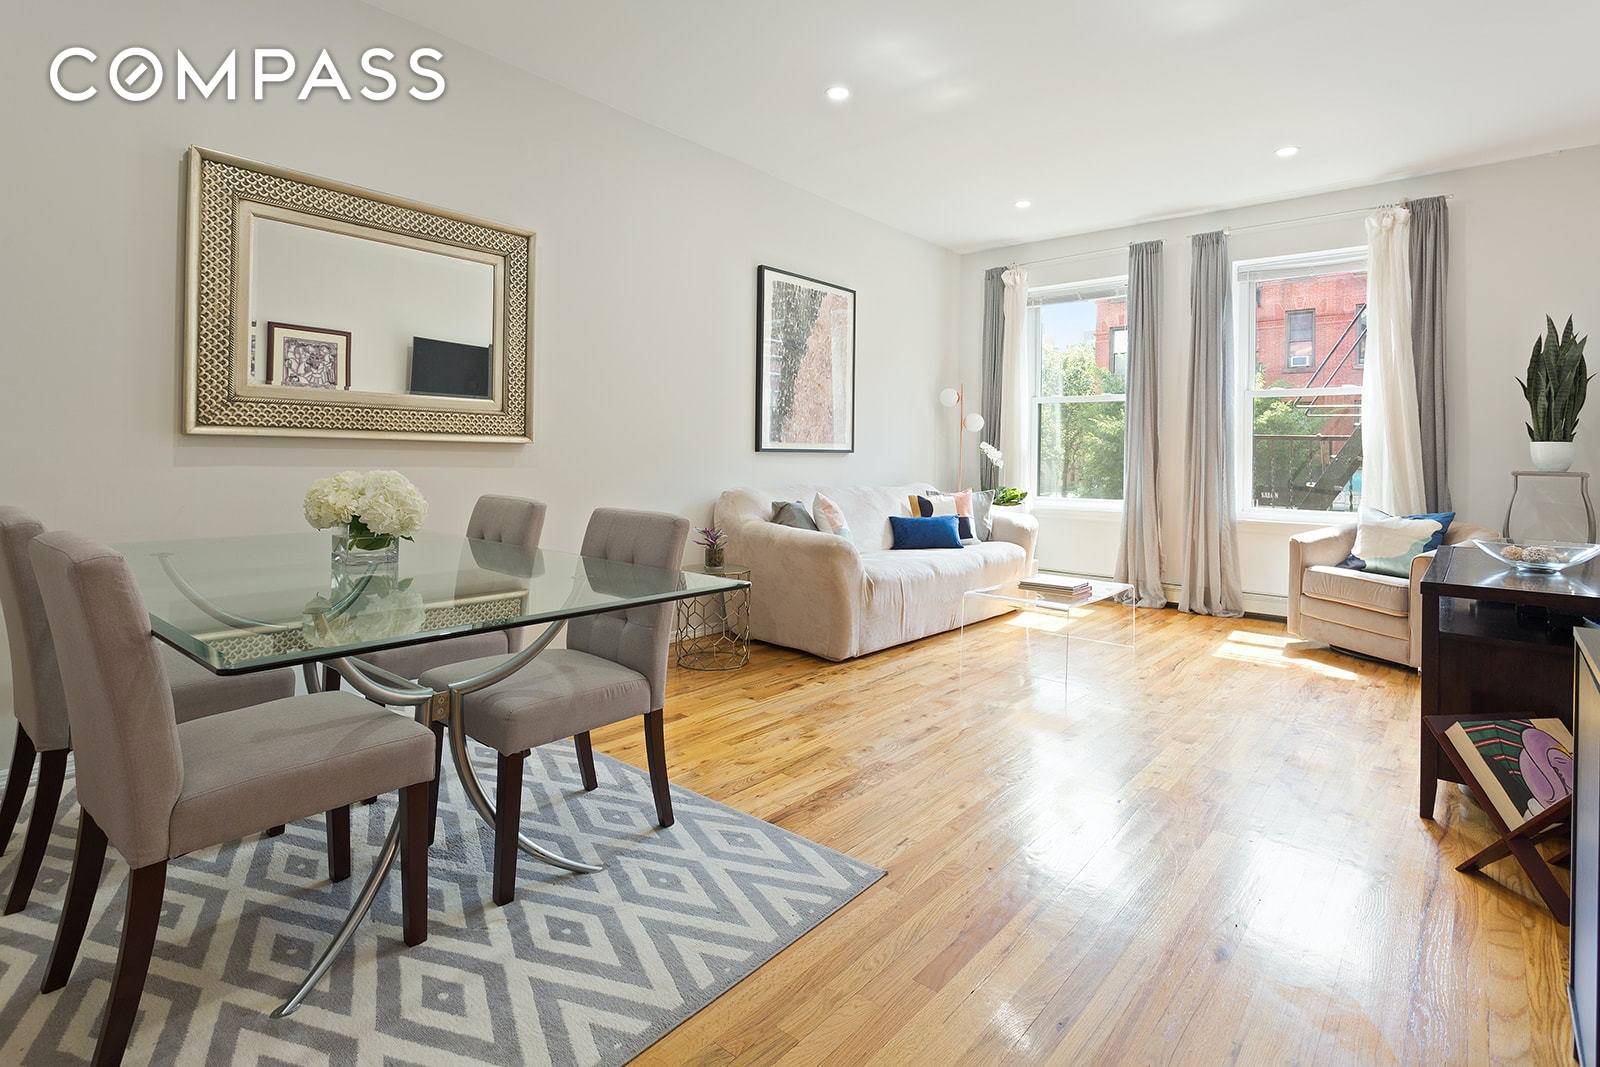 New ! Bright and cheerful 1 bedroom home office and 1 bath coop in lovely Park Slope just minutes from Prospect Park !